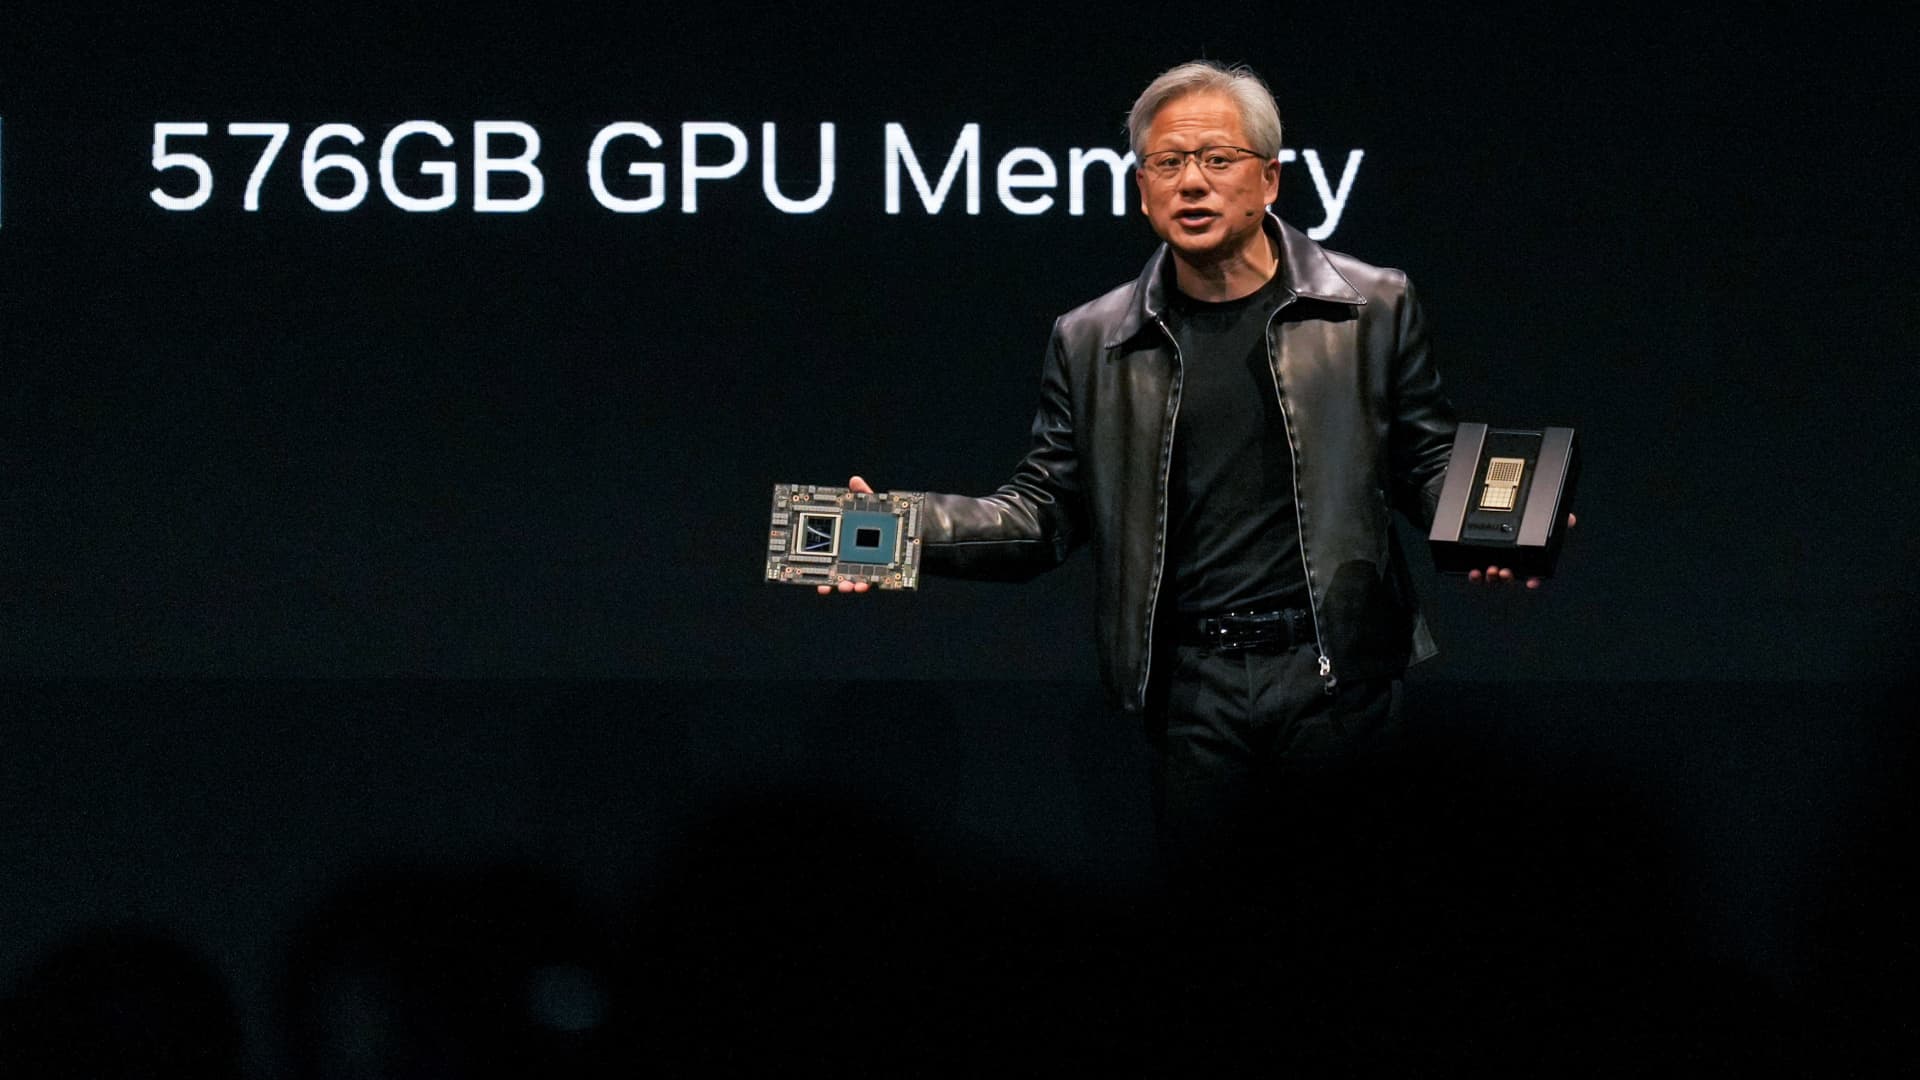 Why Nvidia’s slump is a chance to buy and an Oracle beat would be ‘top quality’